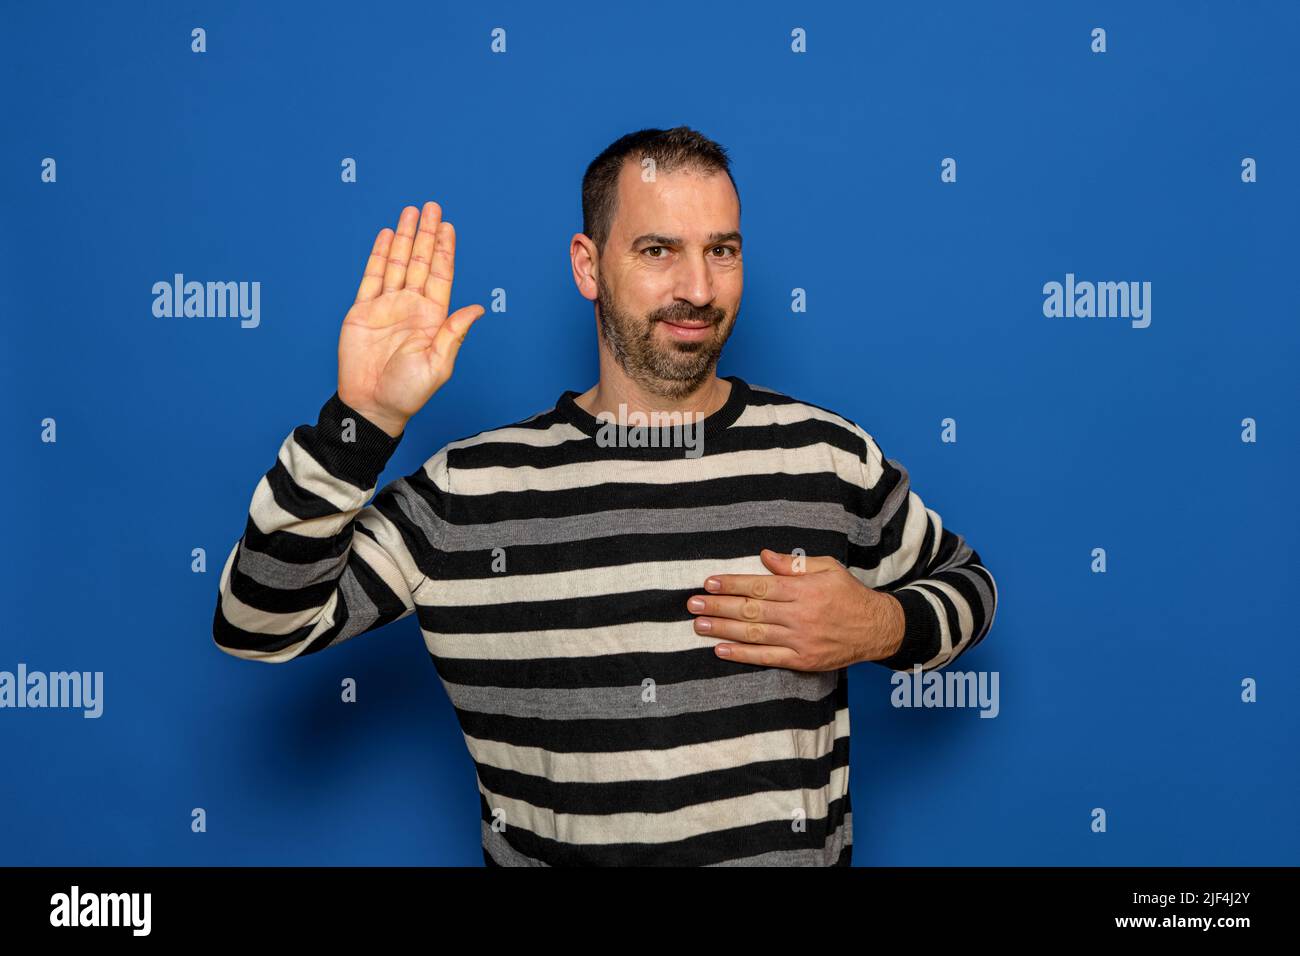 Hispanic man with beard and striped sweater standing over isolated blue background Swearing with hand on chest and open palm, making a loyalty promise Stock Photo